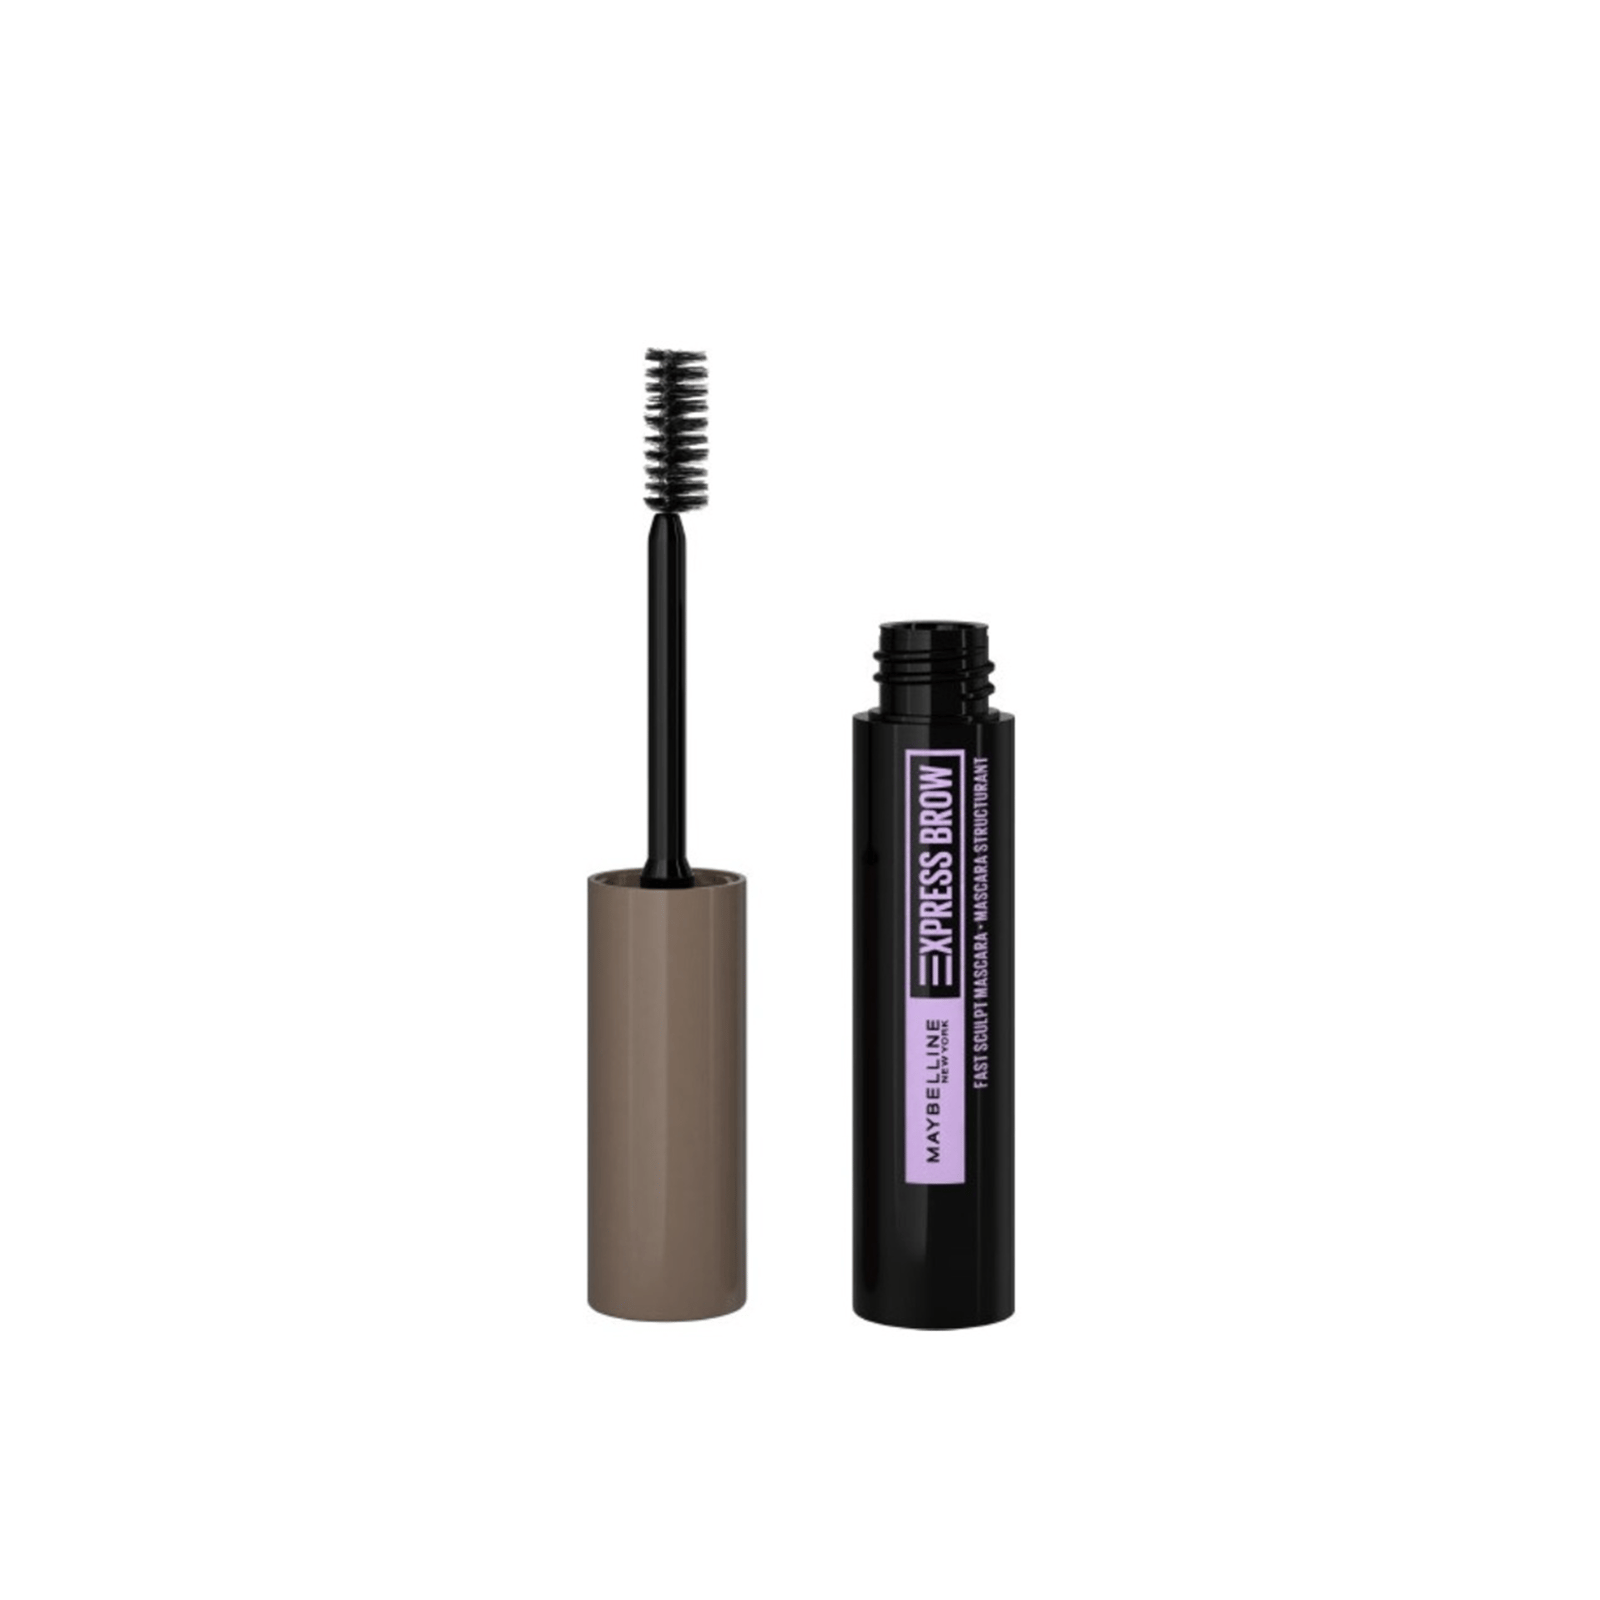 Maybelline Express Brow Fast Sculpt Mascara 02 Soft Brown